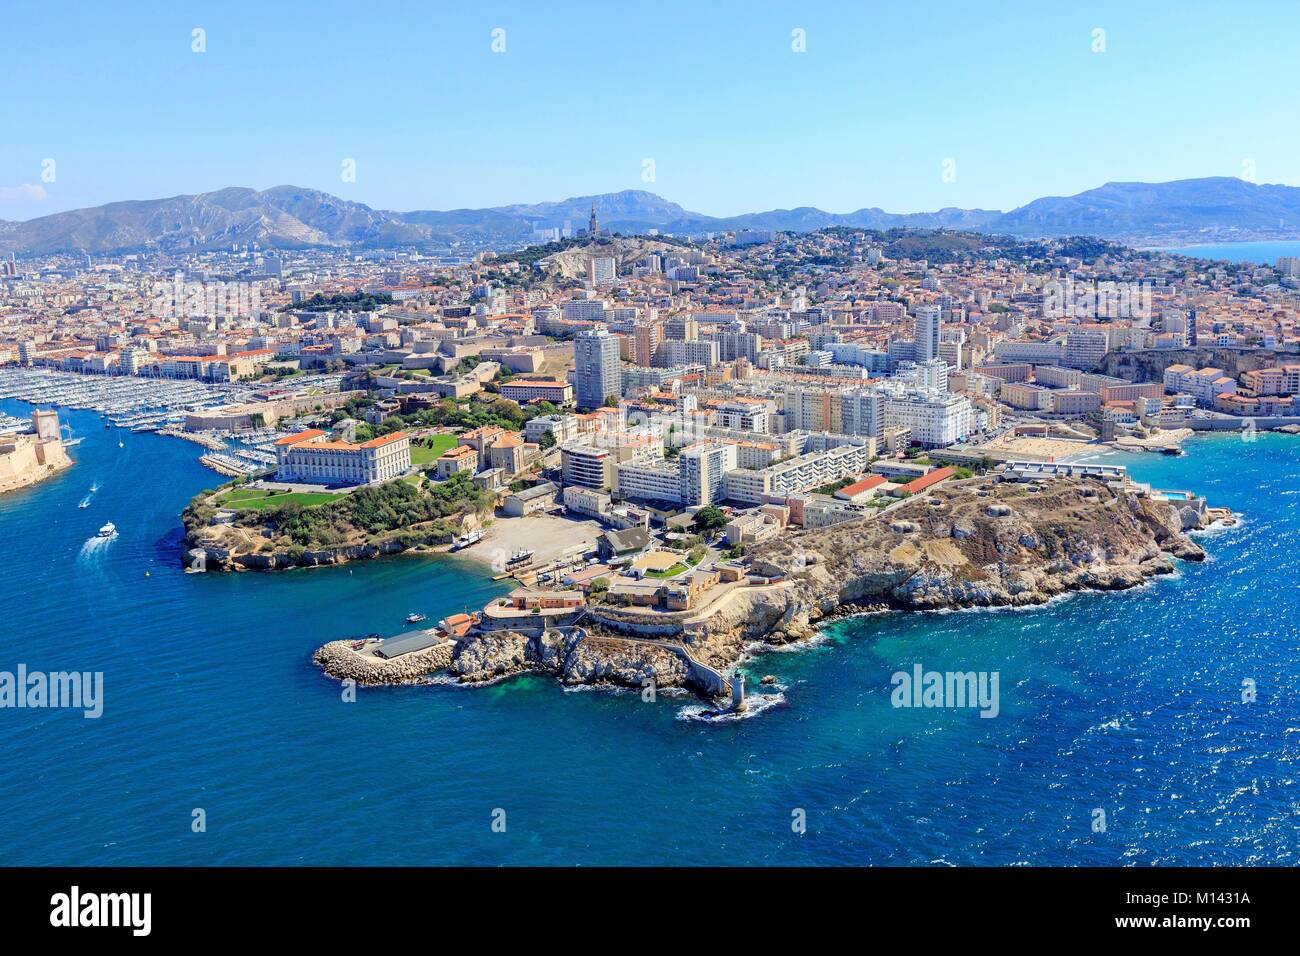 France, Bouches du Rhone, Marseille, Pharo district, Pharo palace and Pharo cove (aerial view) Stock Photo